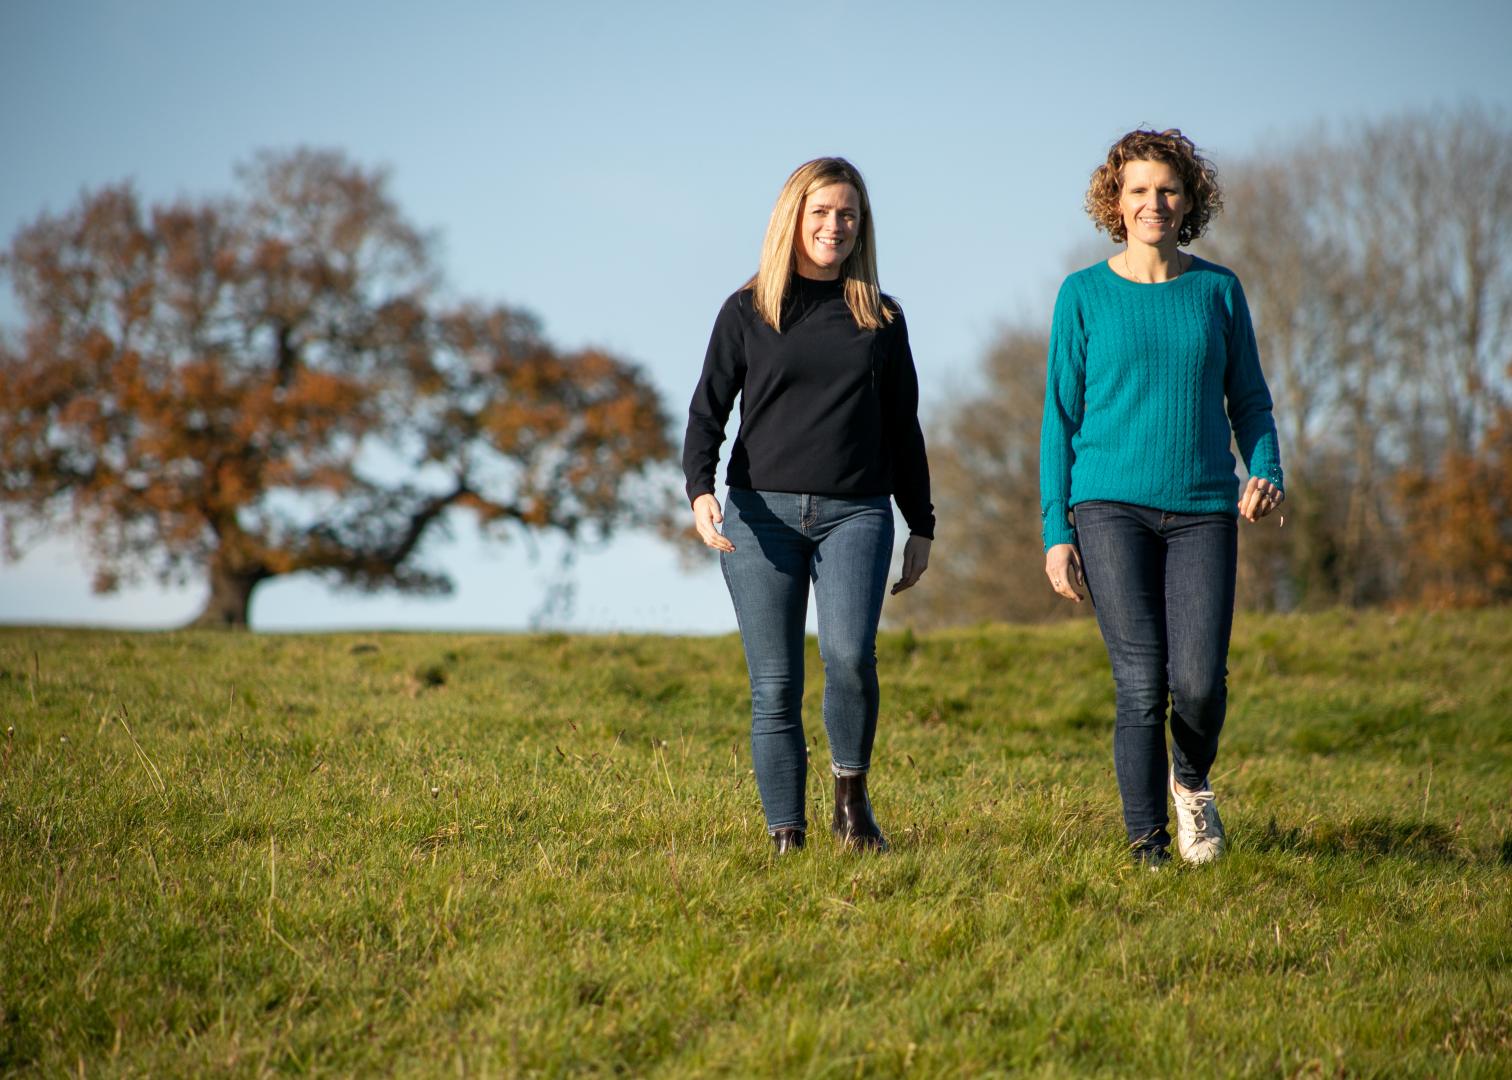 Camilla Rigby and Rachel Mostyn, co-founders of Women's Work Lab